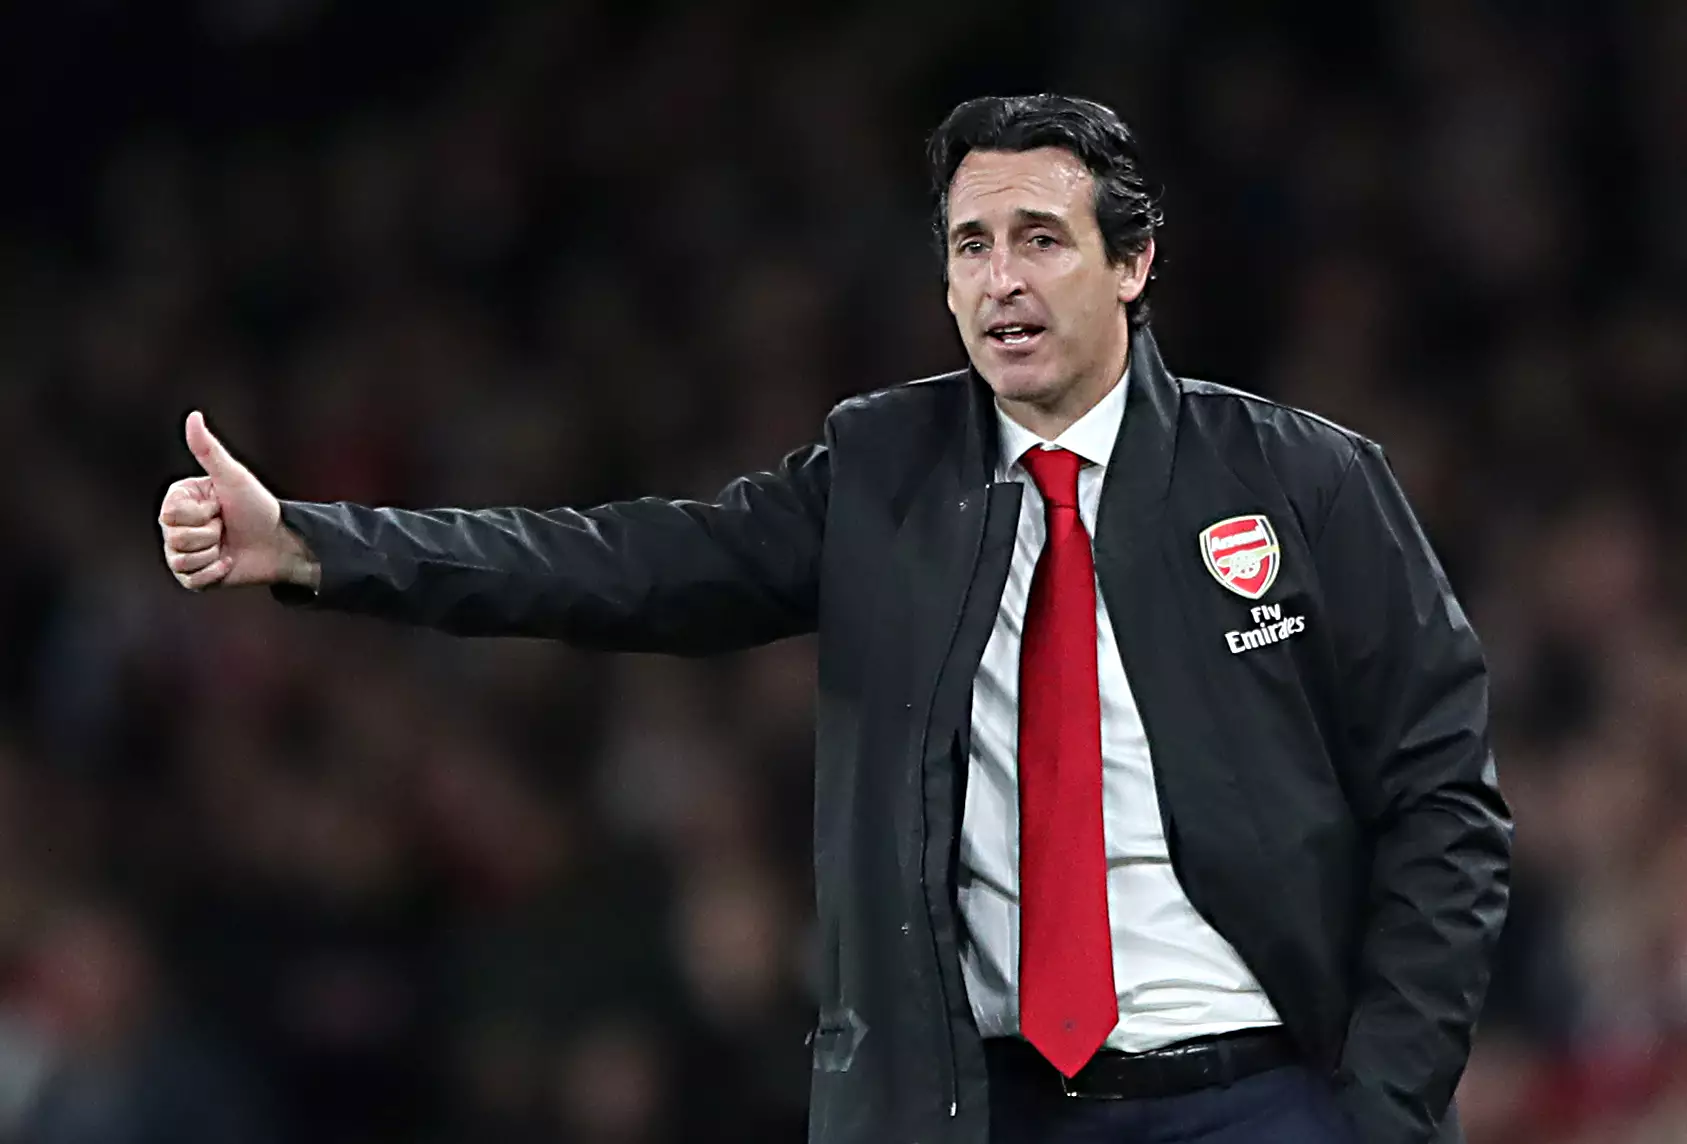 Things are going well for Emery so far. Image: PA Images